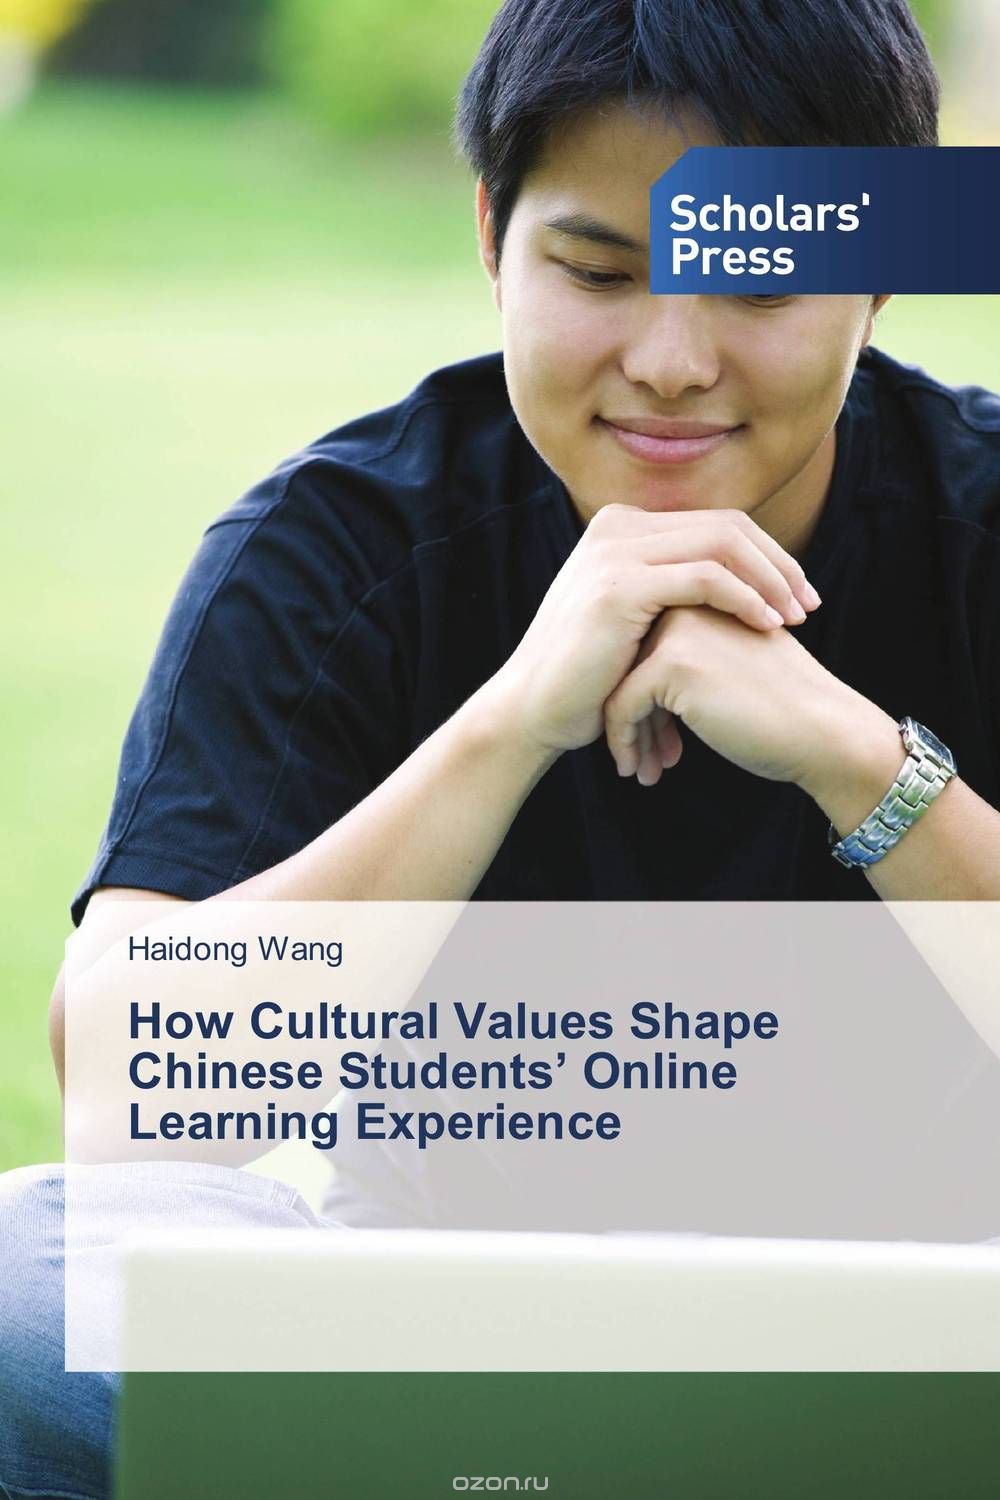 Скачать книгу "How Cultural Values Shape Chinese Students’ Online Learning Experience"